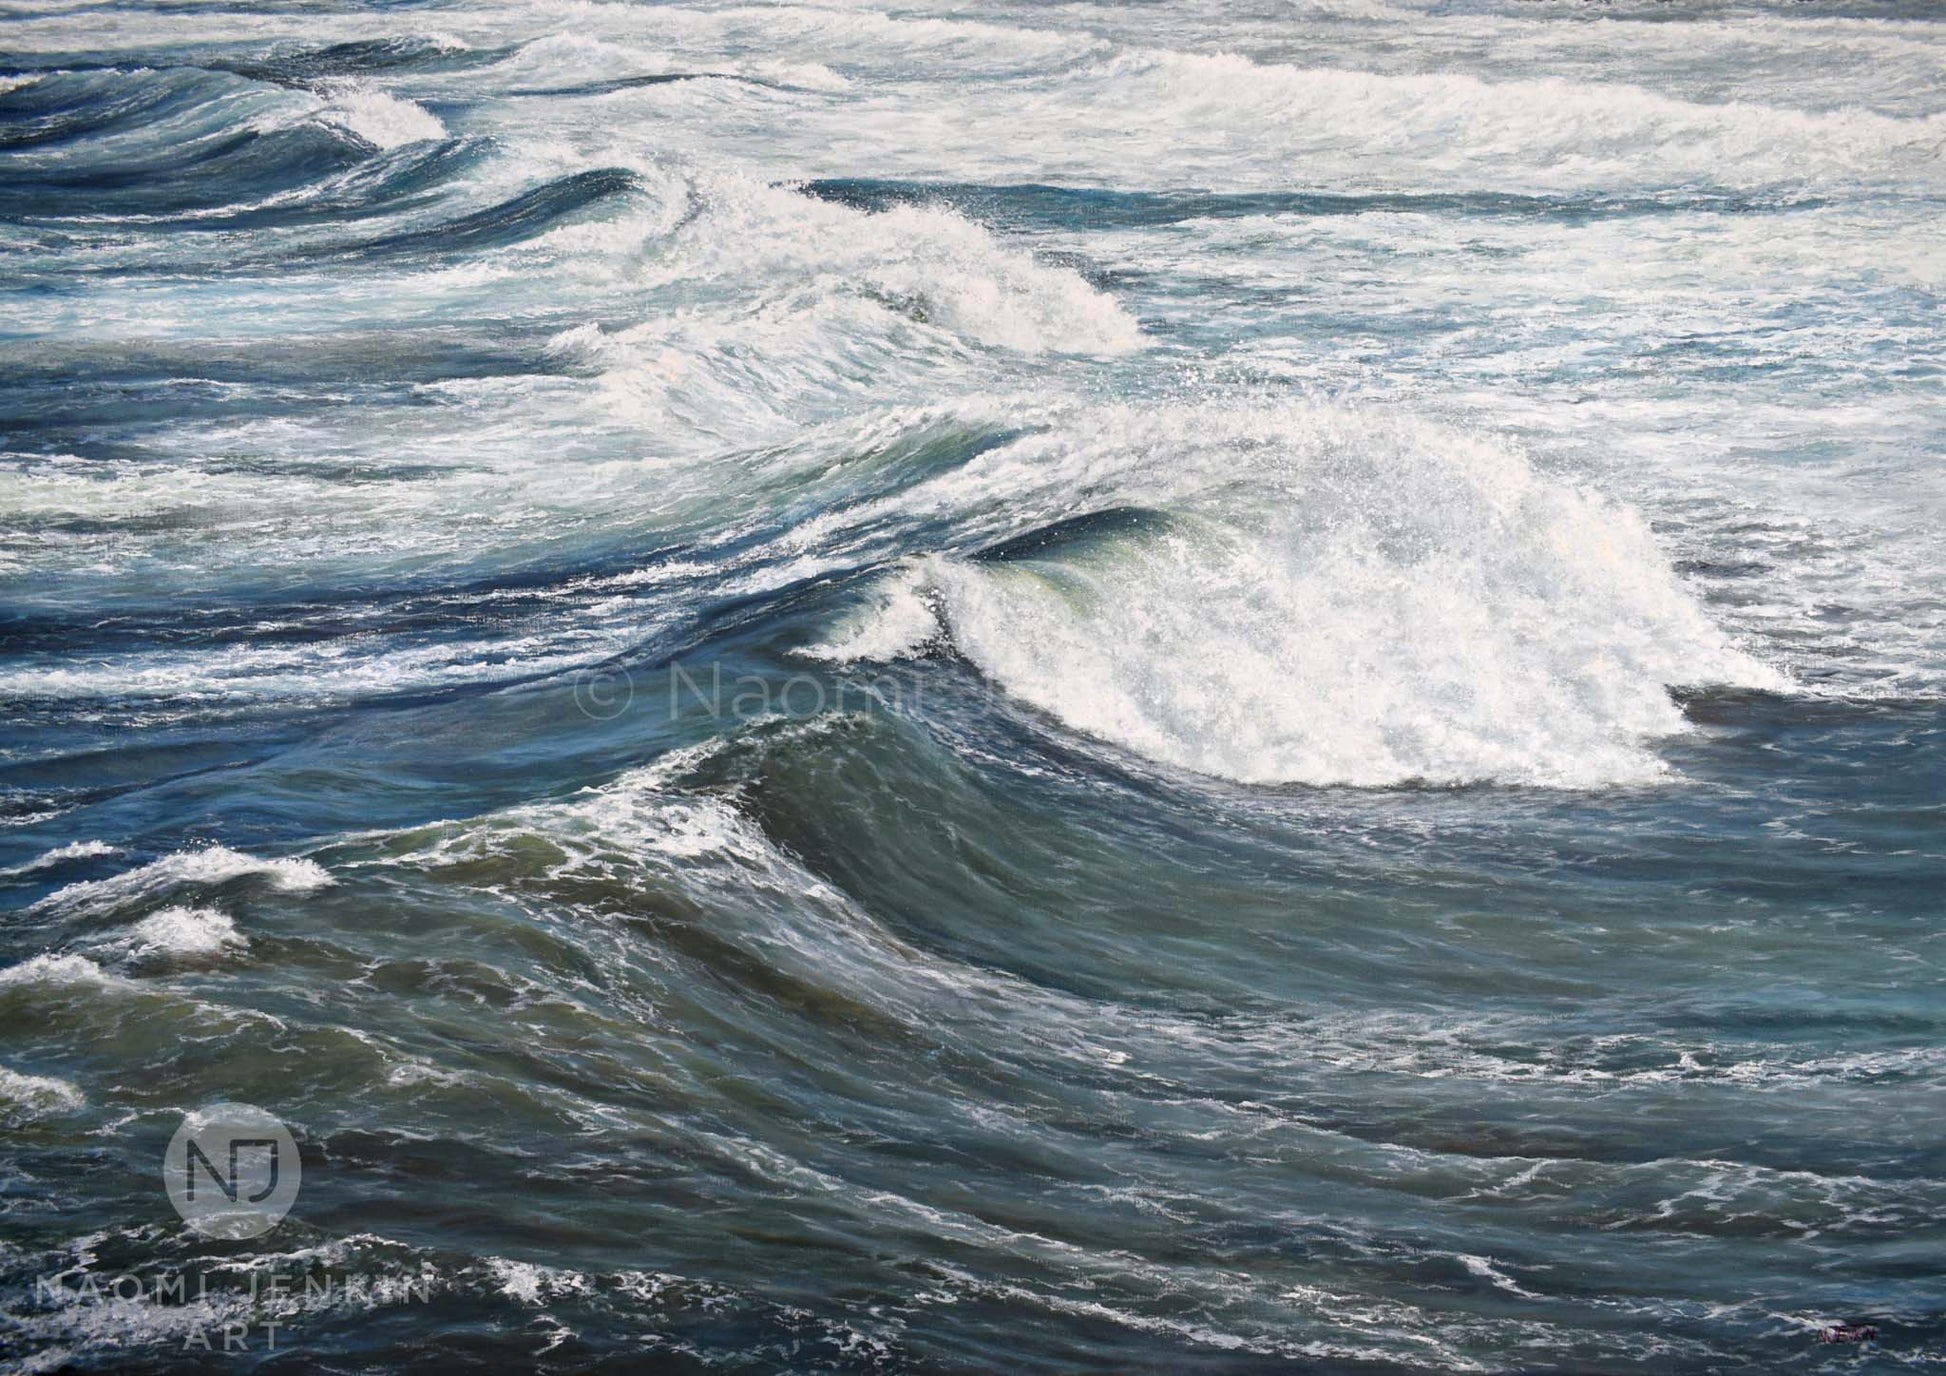 Close up of a seascape painting from the print 'Wind Swept Rollers' by Naomi Jenkin